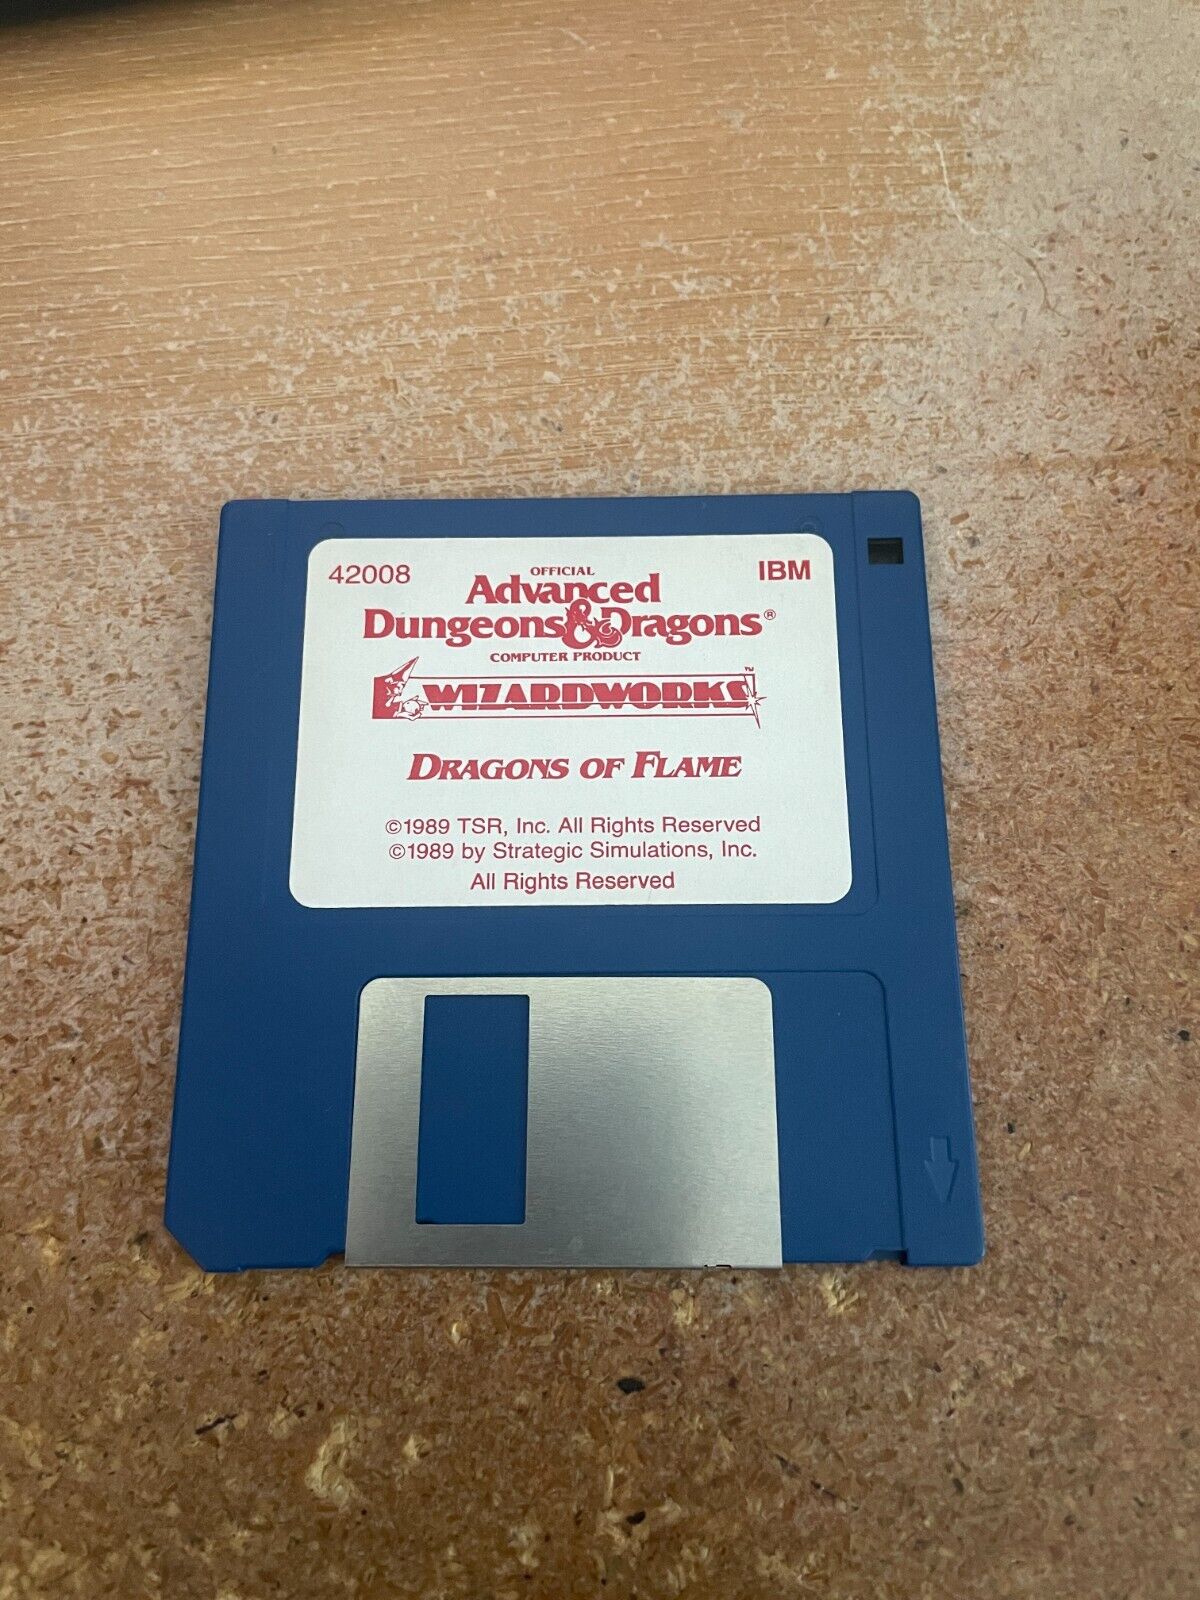 Advanced Dungeons & Dragons: Dragons of Flame PC IBM Game 5.25